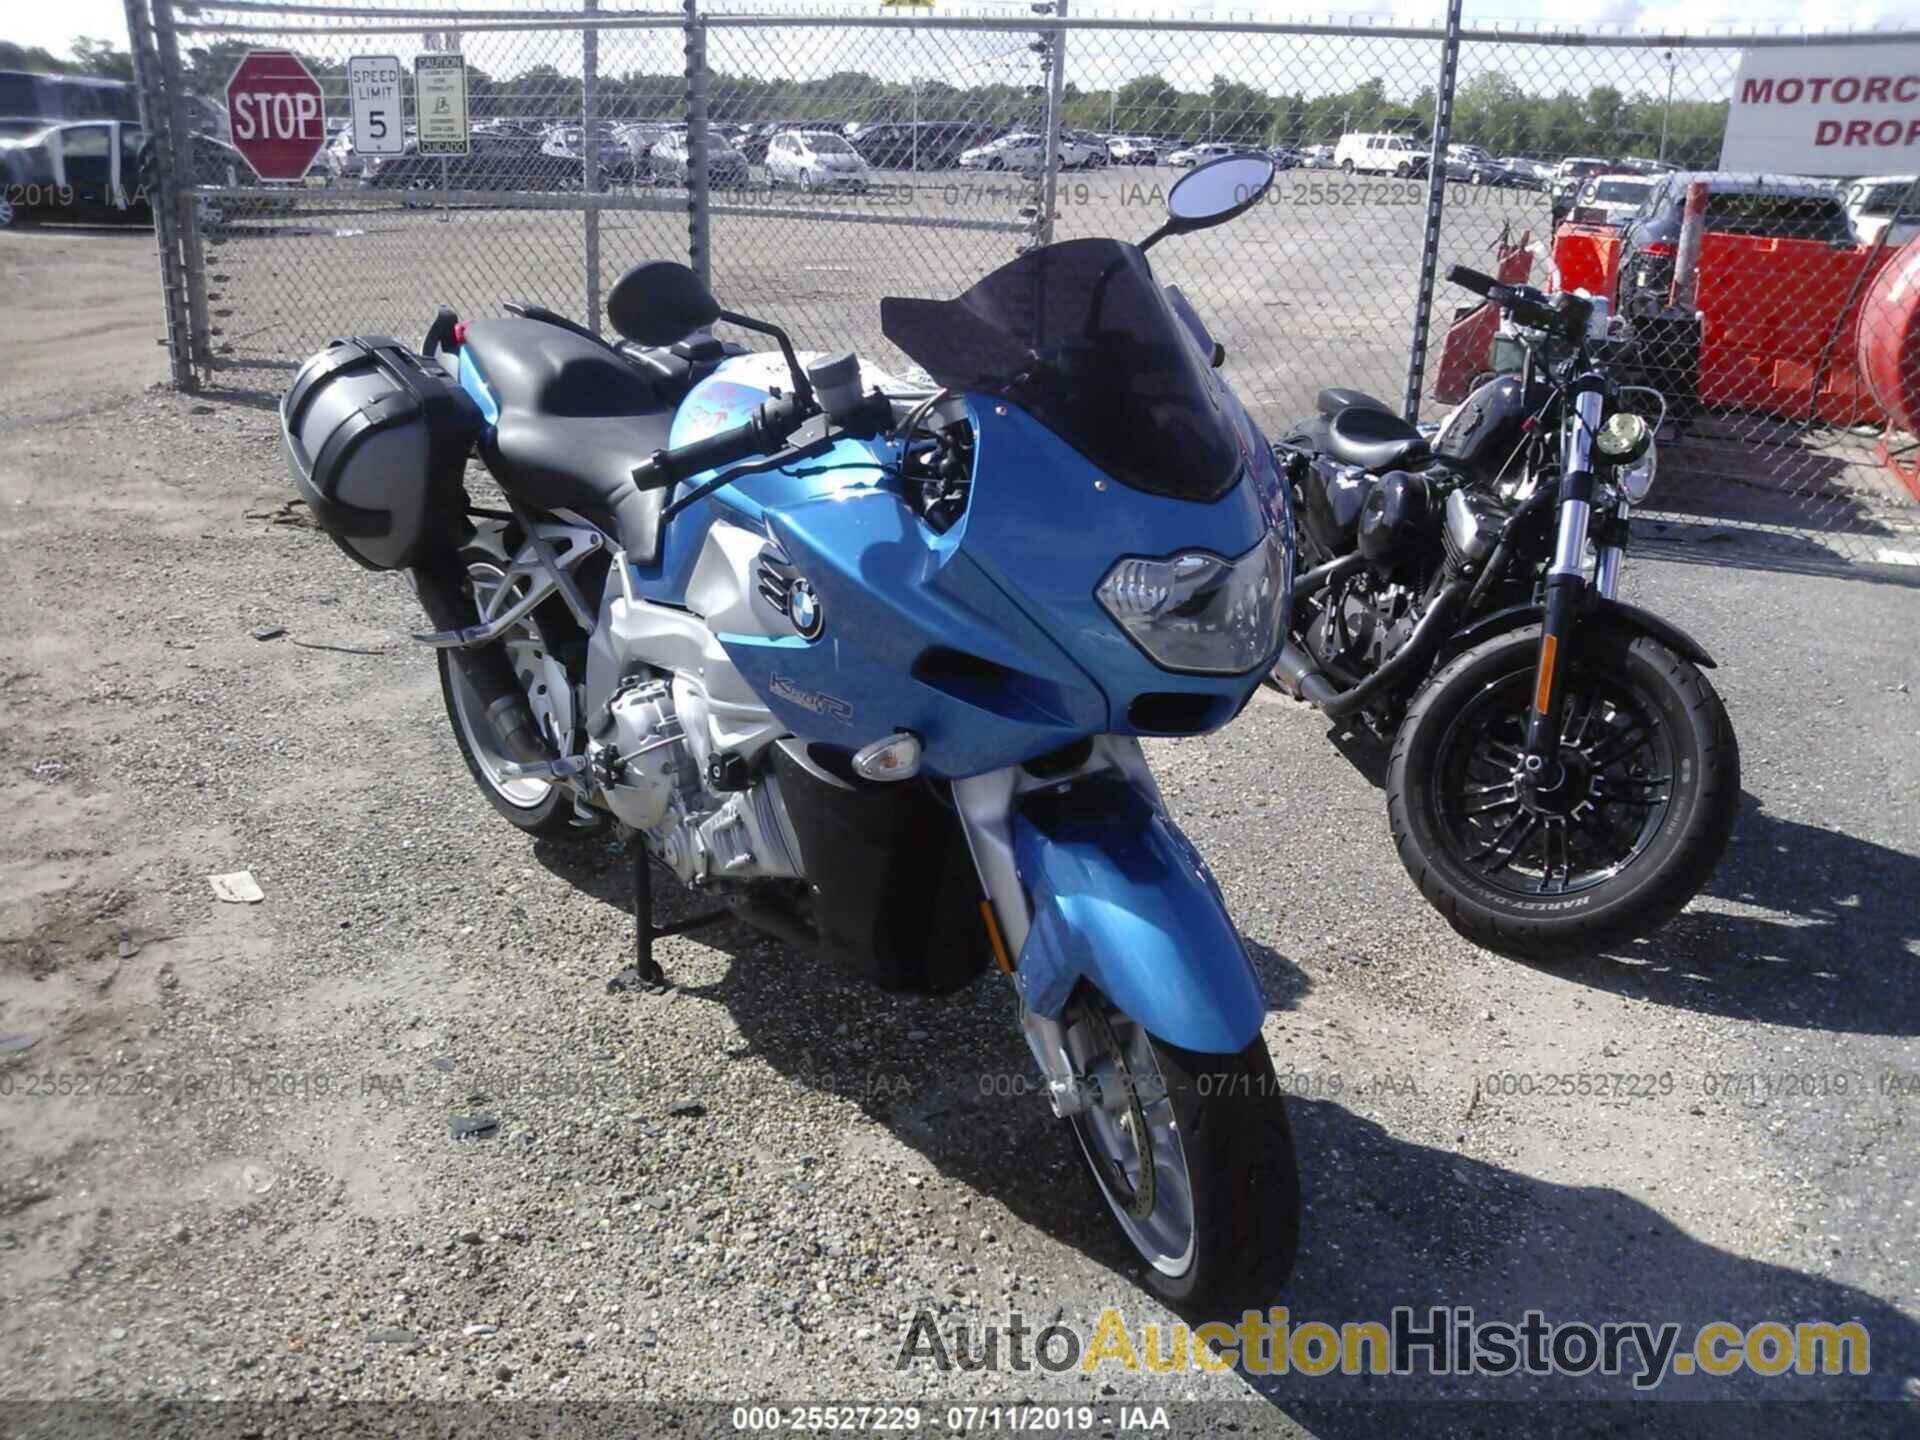 BMW K1200 RS, WB10595047ZP85317